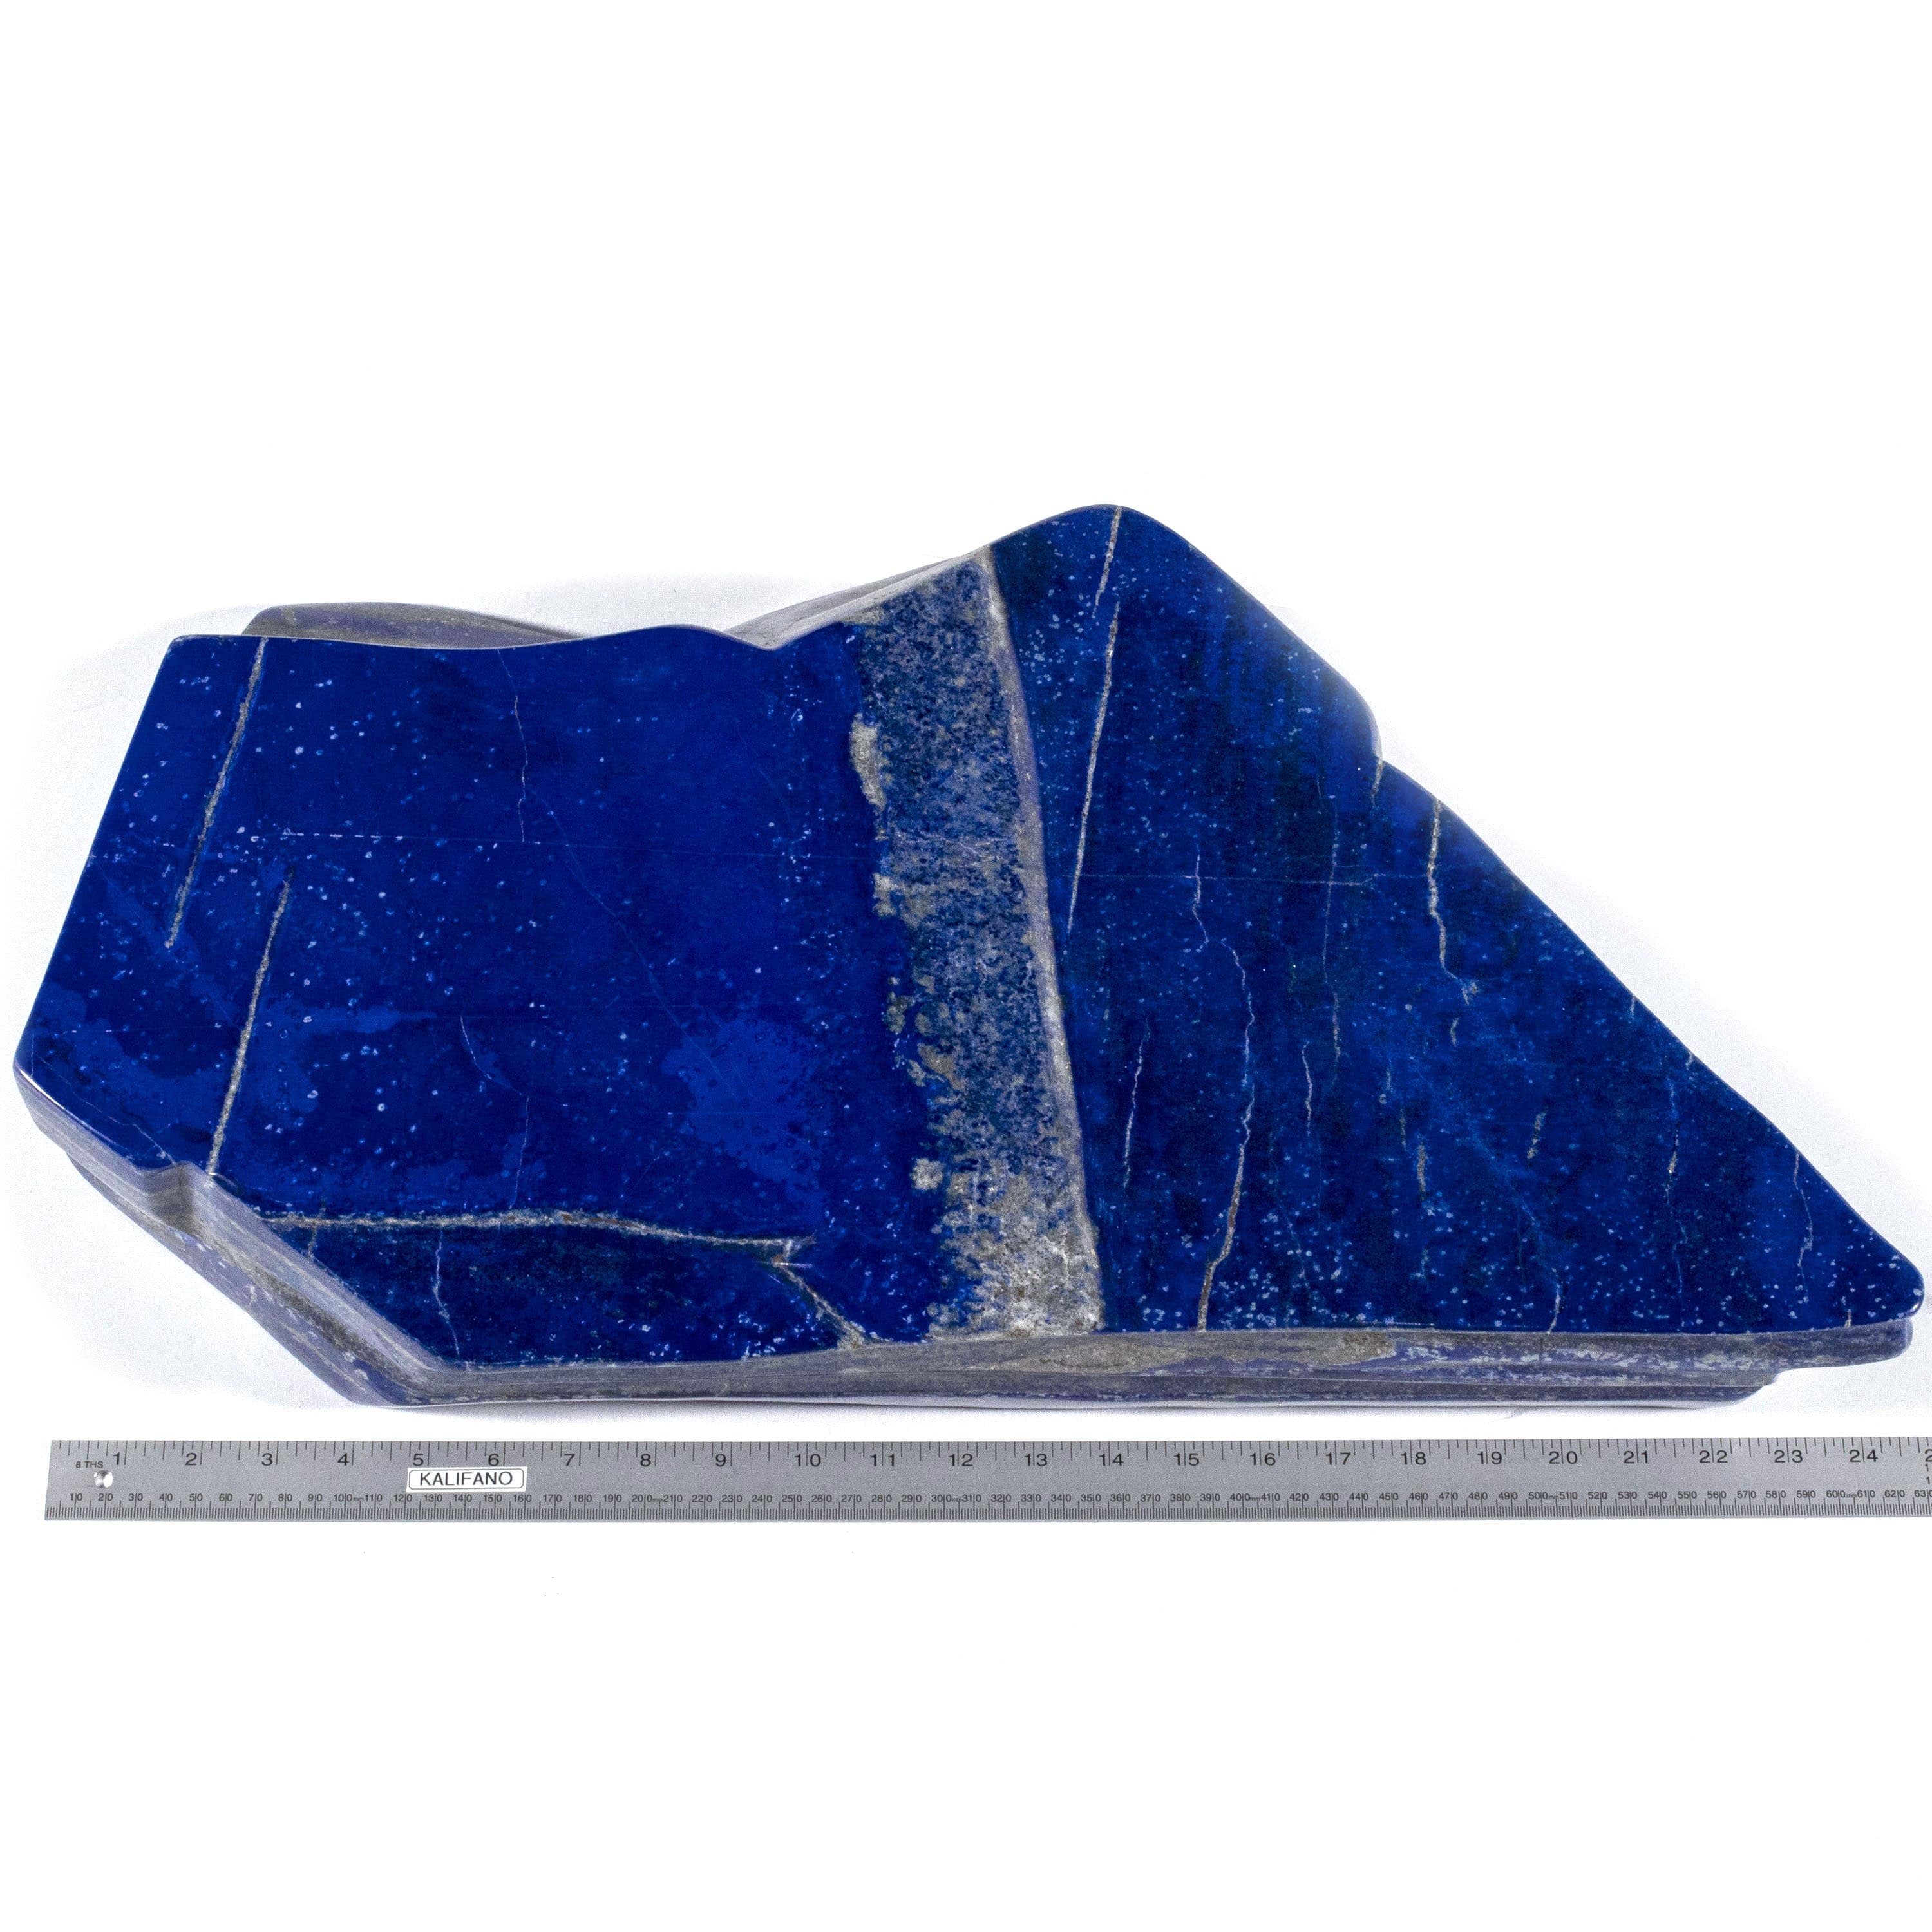 Kalifano Lapis Rare Natural Blue Polished Lapis Lazuli Freeform Carving from Afghanistan - 40.9 kg / 90.2 lbs LPS38000.001